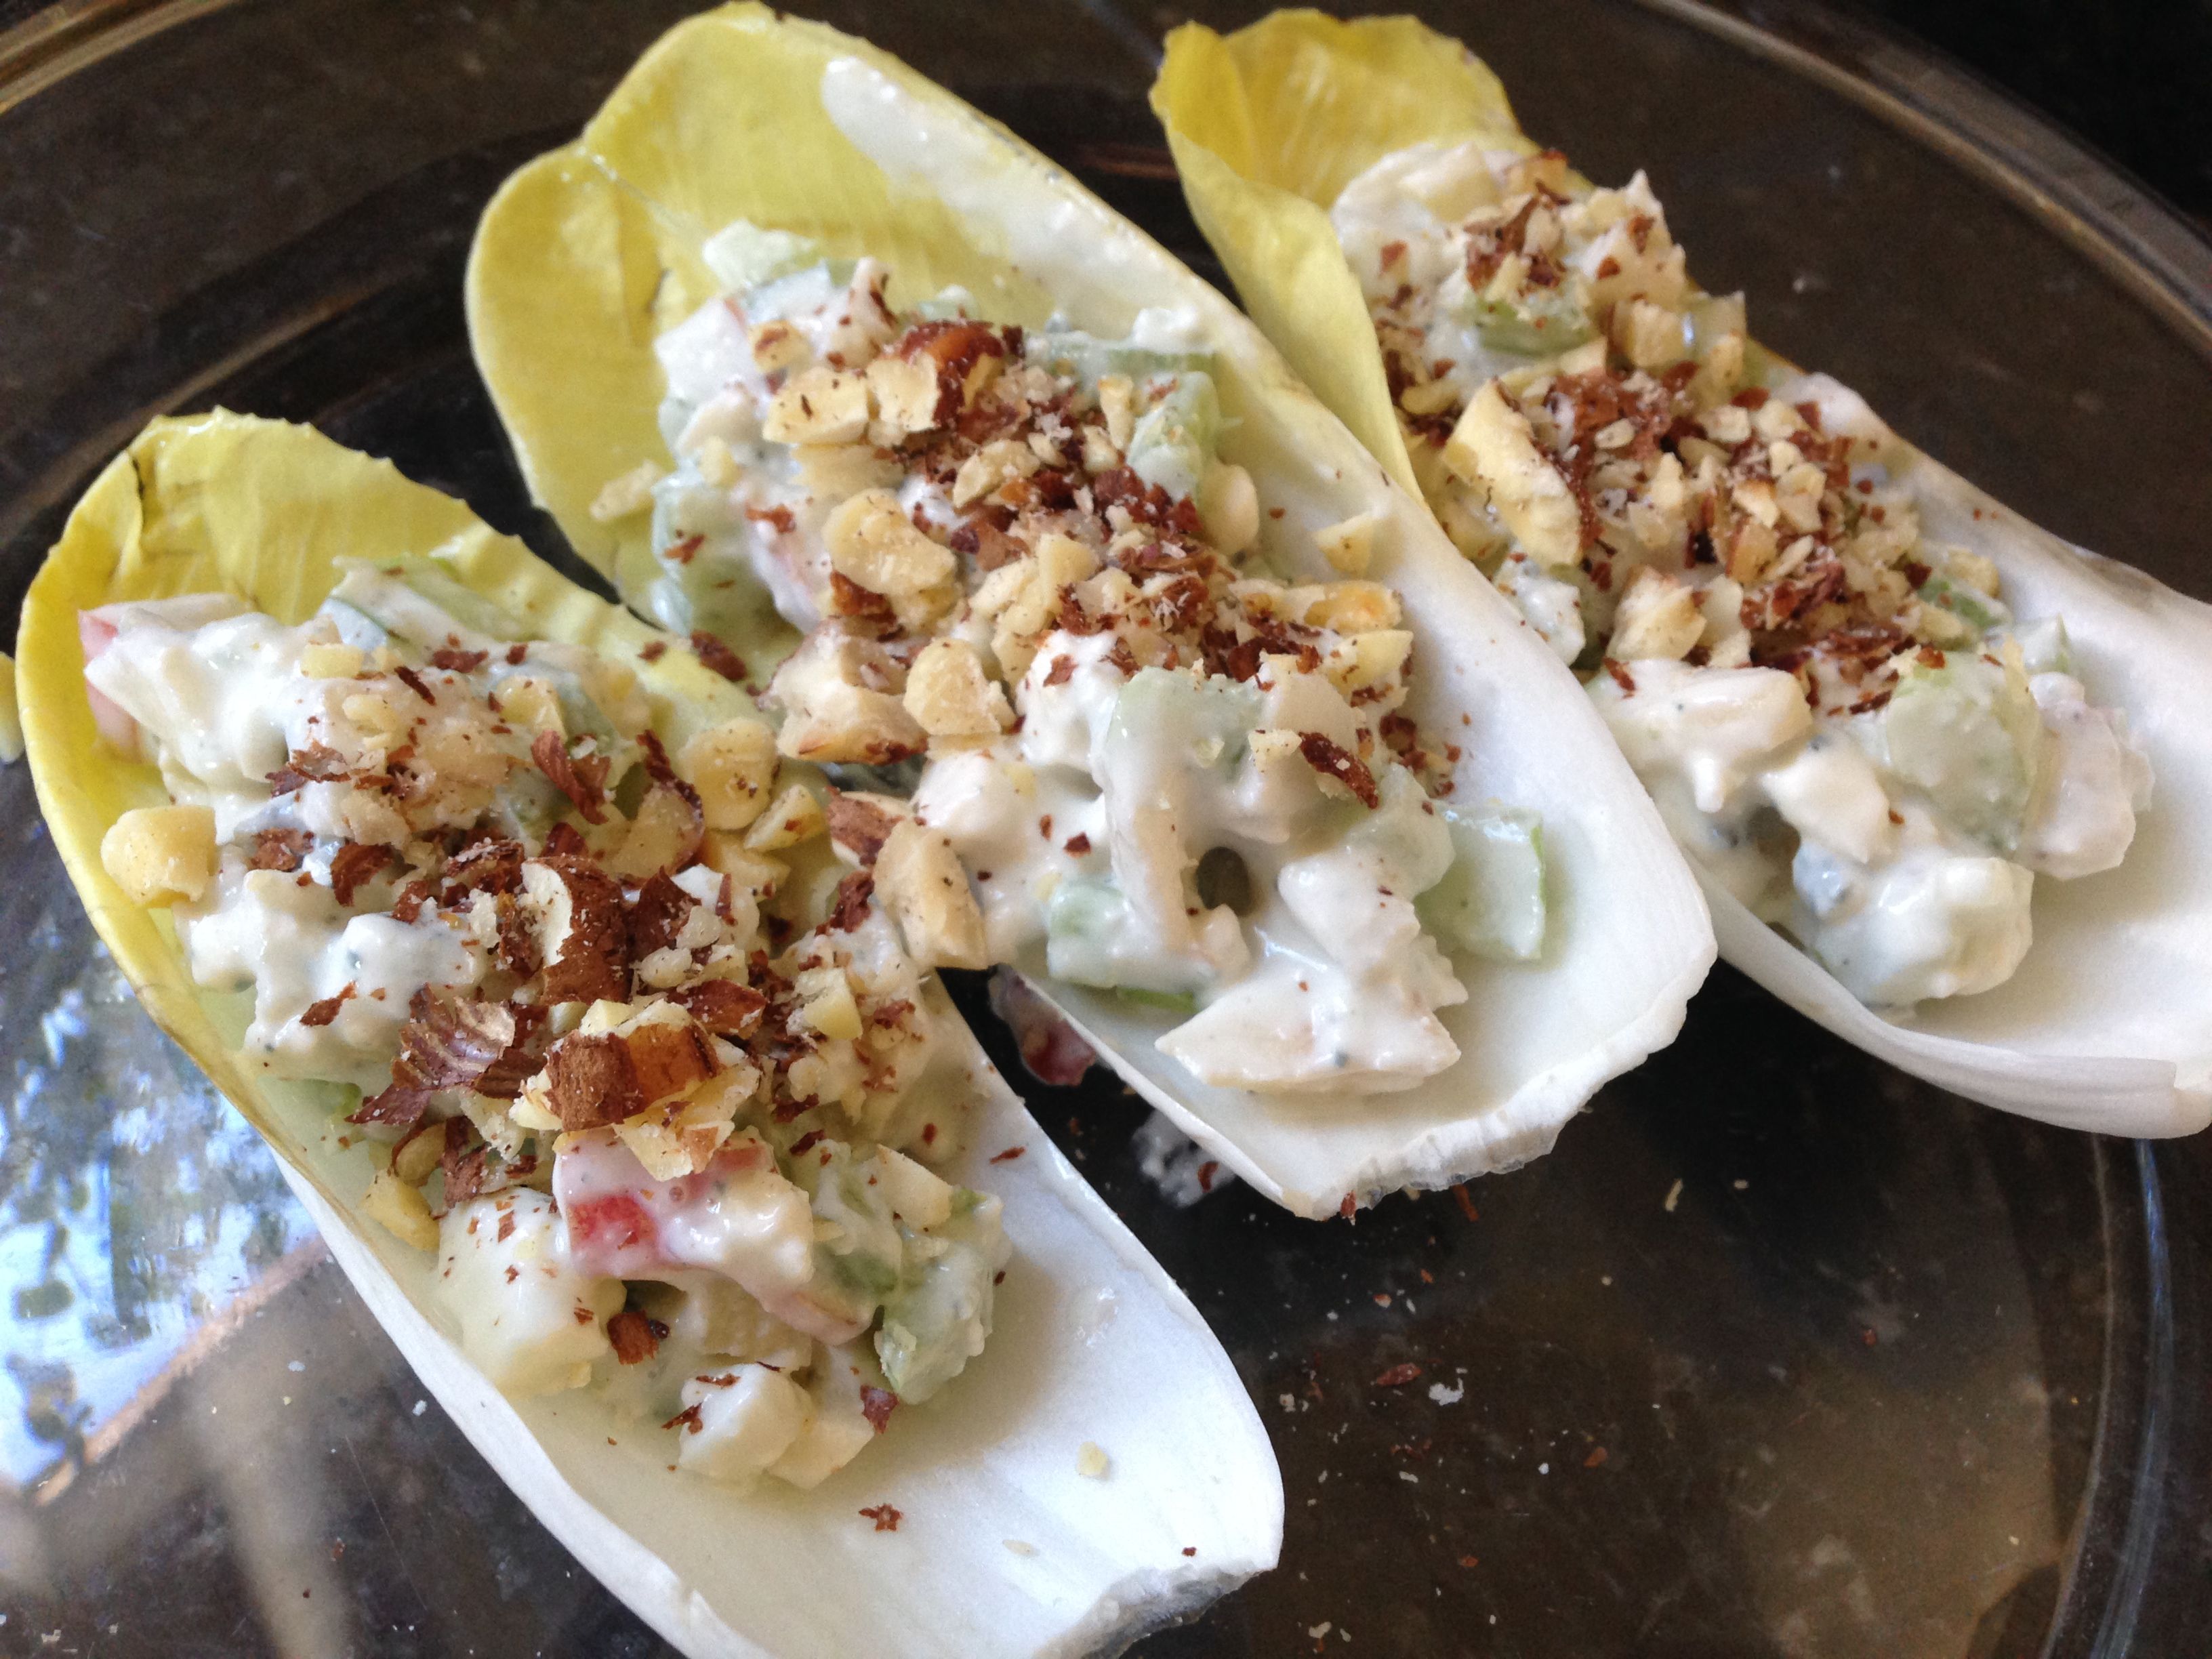 Endive Boats with Apple, Blue Cheese, and Hazelnuts